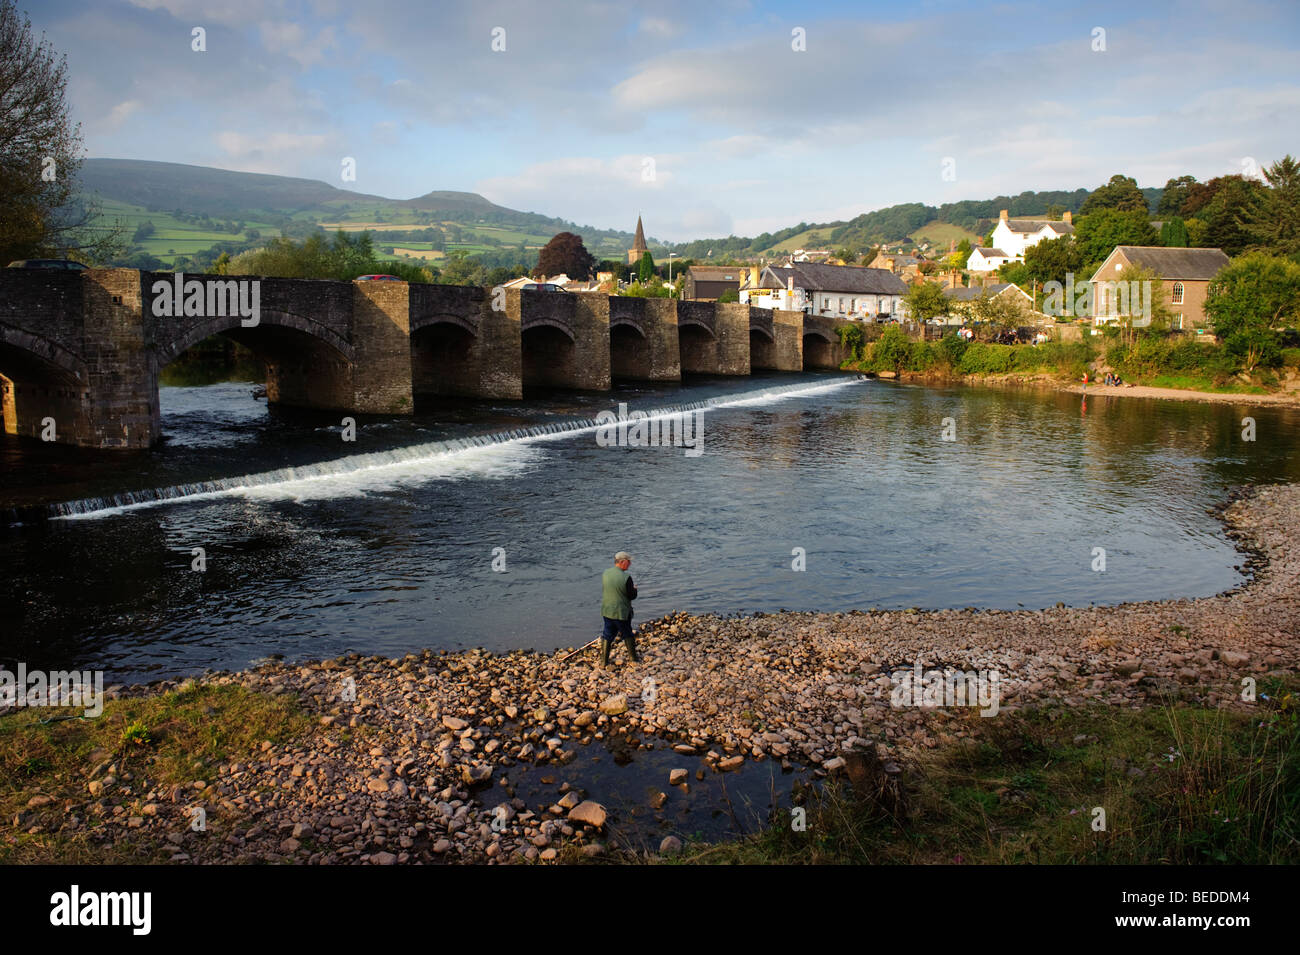 The old bridge over the River Usk at Crickhowell, Powys Mid wales UK, with Table Mountain in the distance, and a man fishing Stock Photo